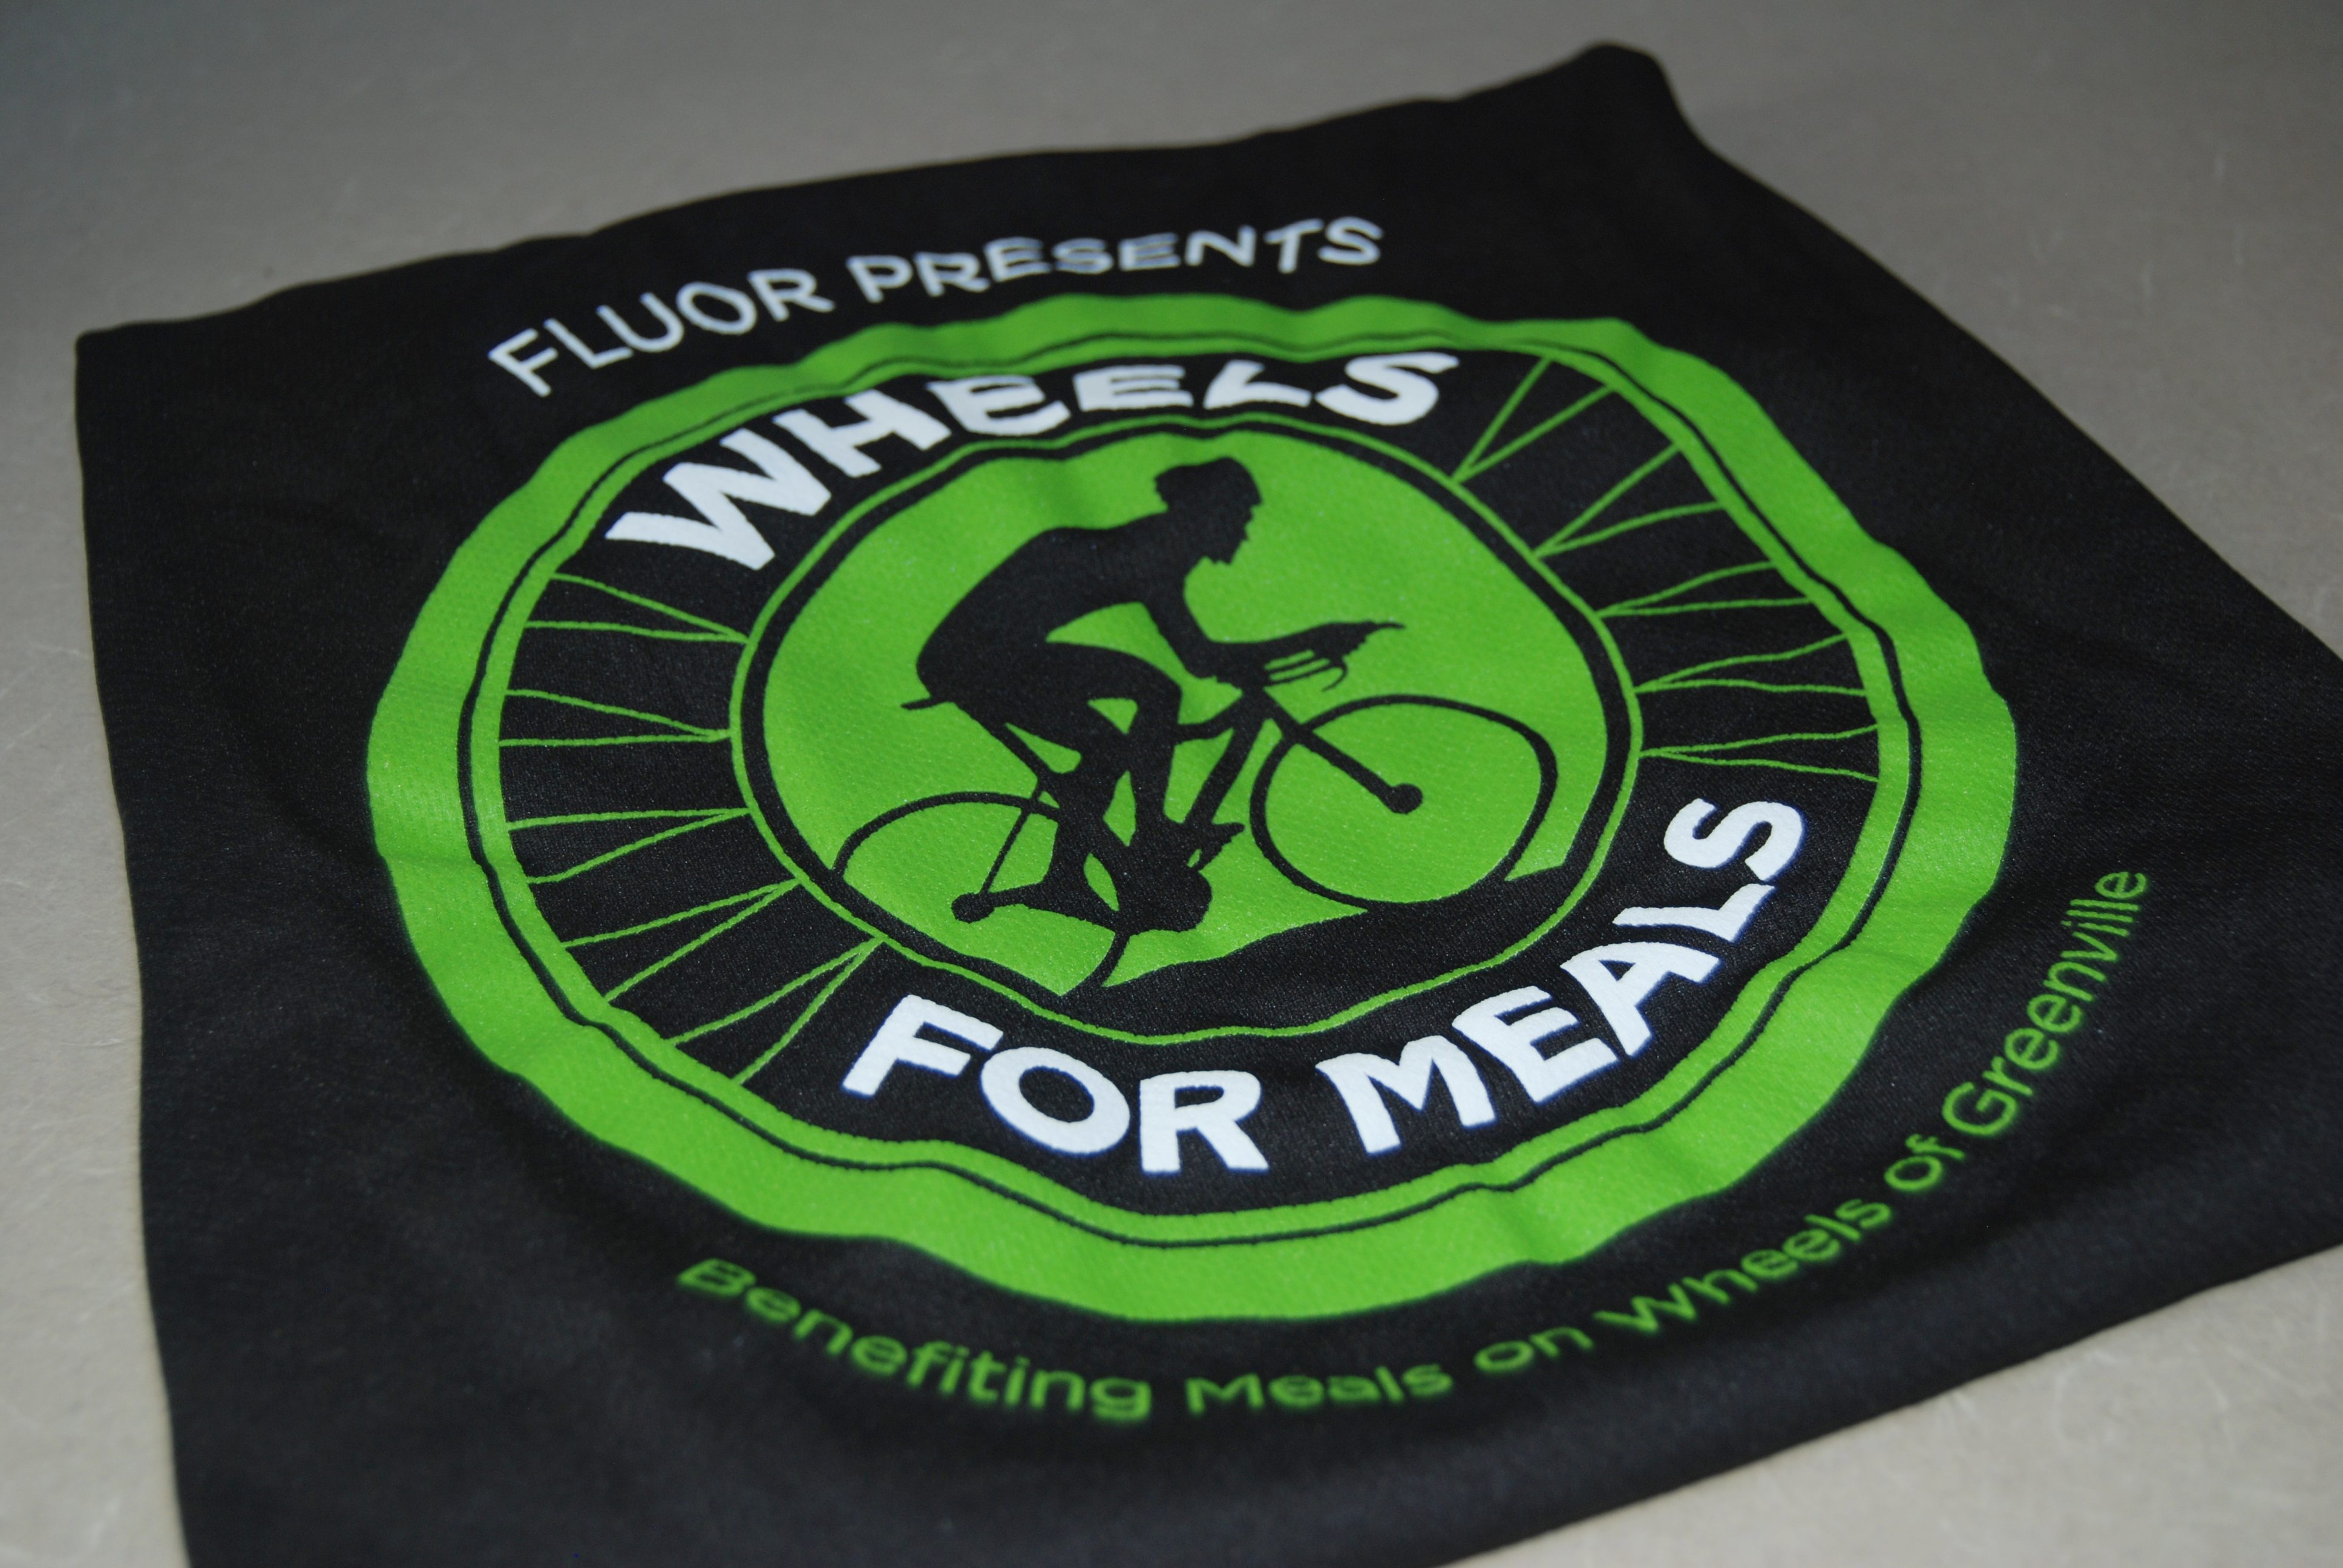 2019 Wheels for Meals Rider Shirt